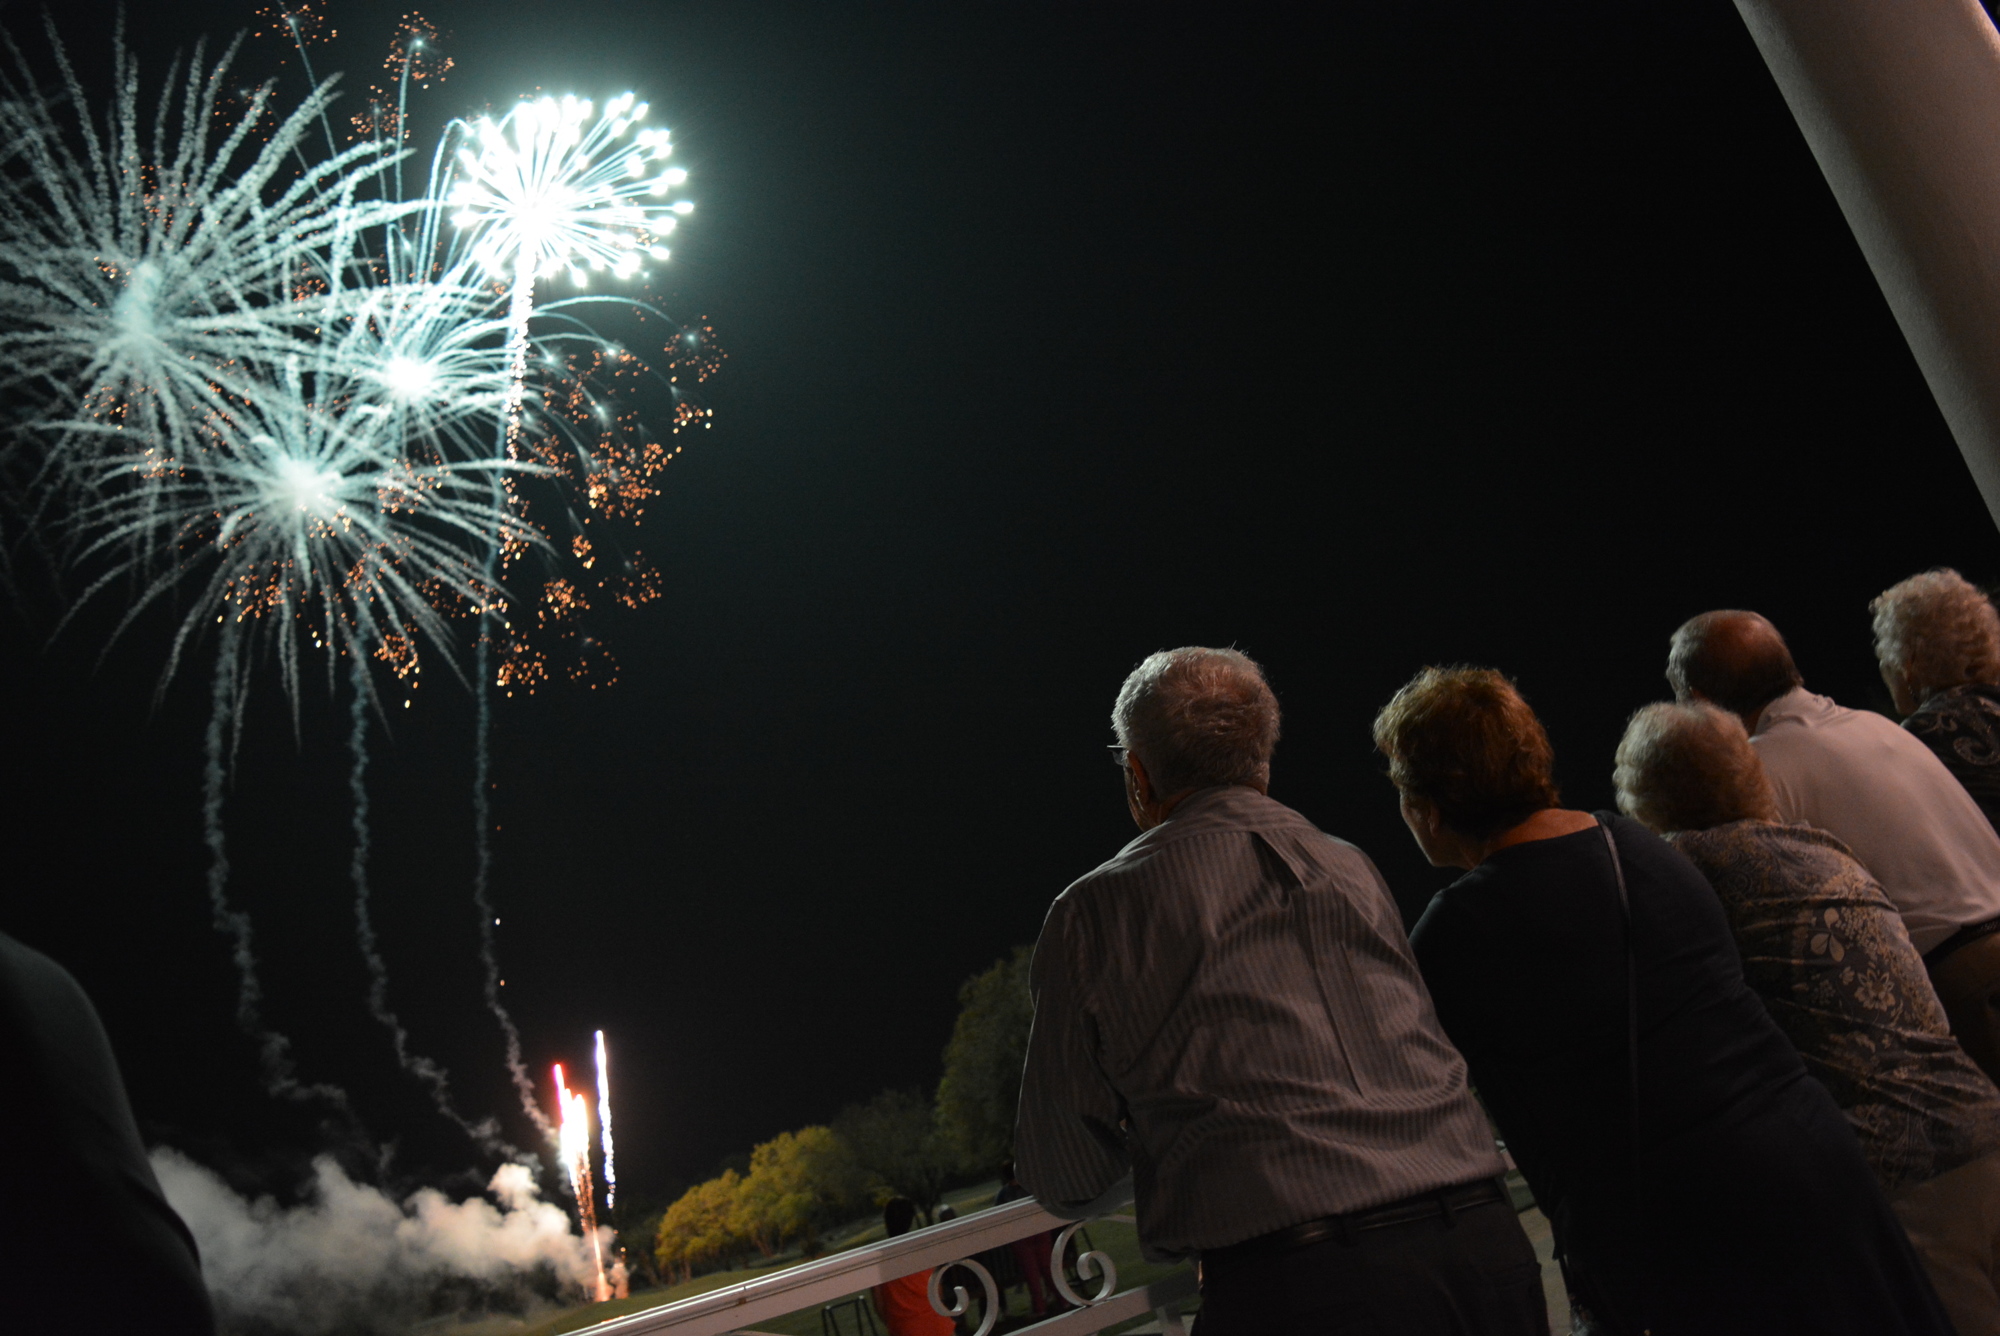 Attendees of a March 2 dinner celebration at Tara Golf and Country Club enjoyed a fireworks display around 8:30 p.m.